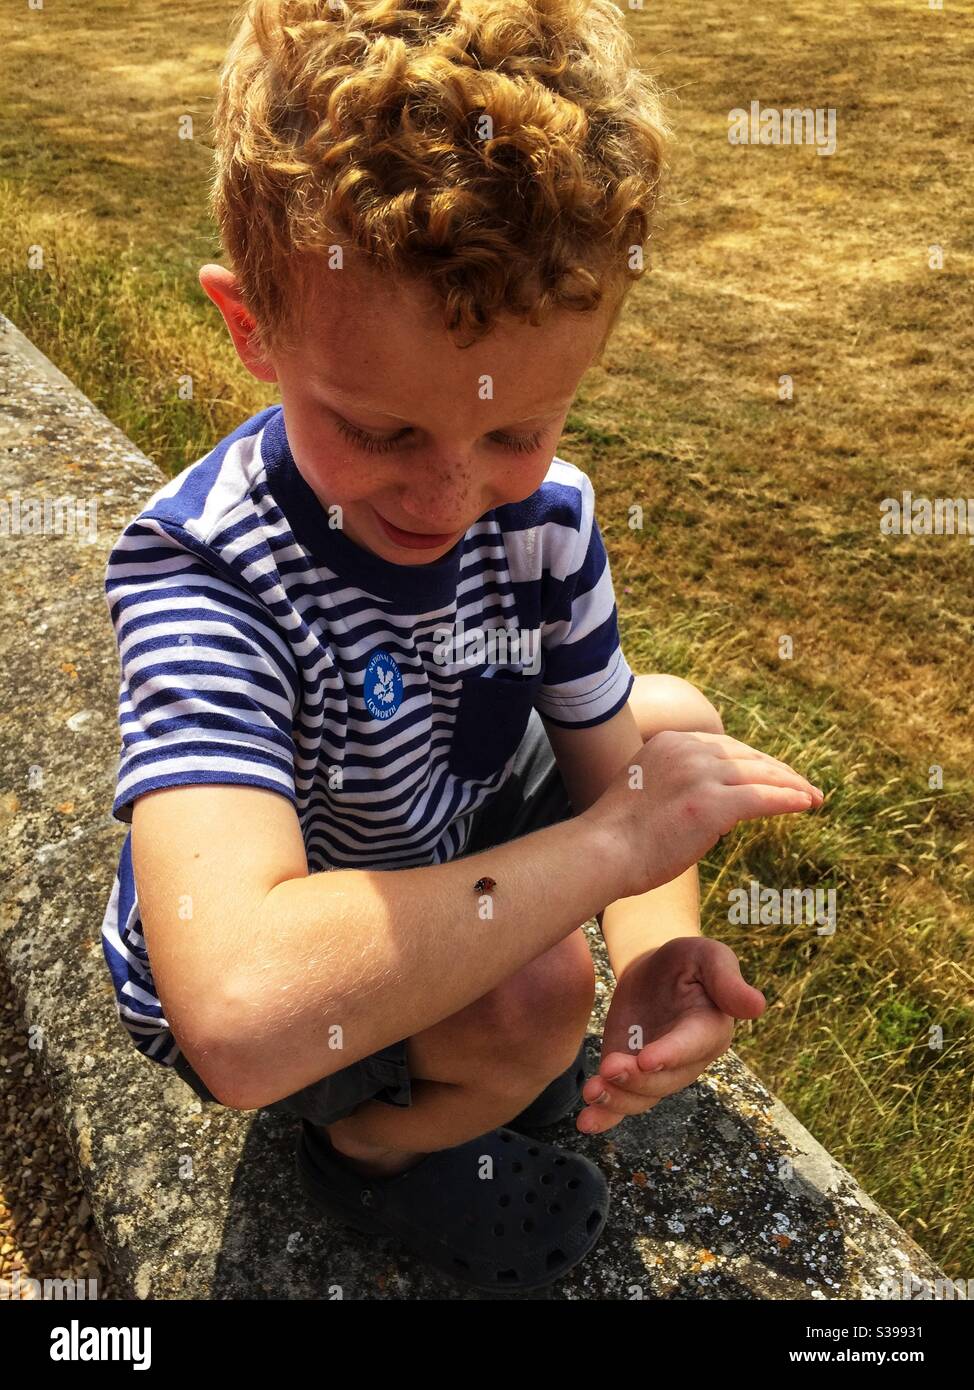 Boy fascinated by Ladybird on his arm Stock Photo